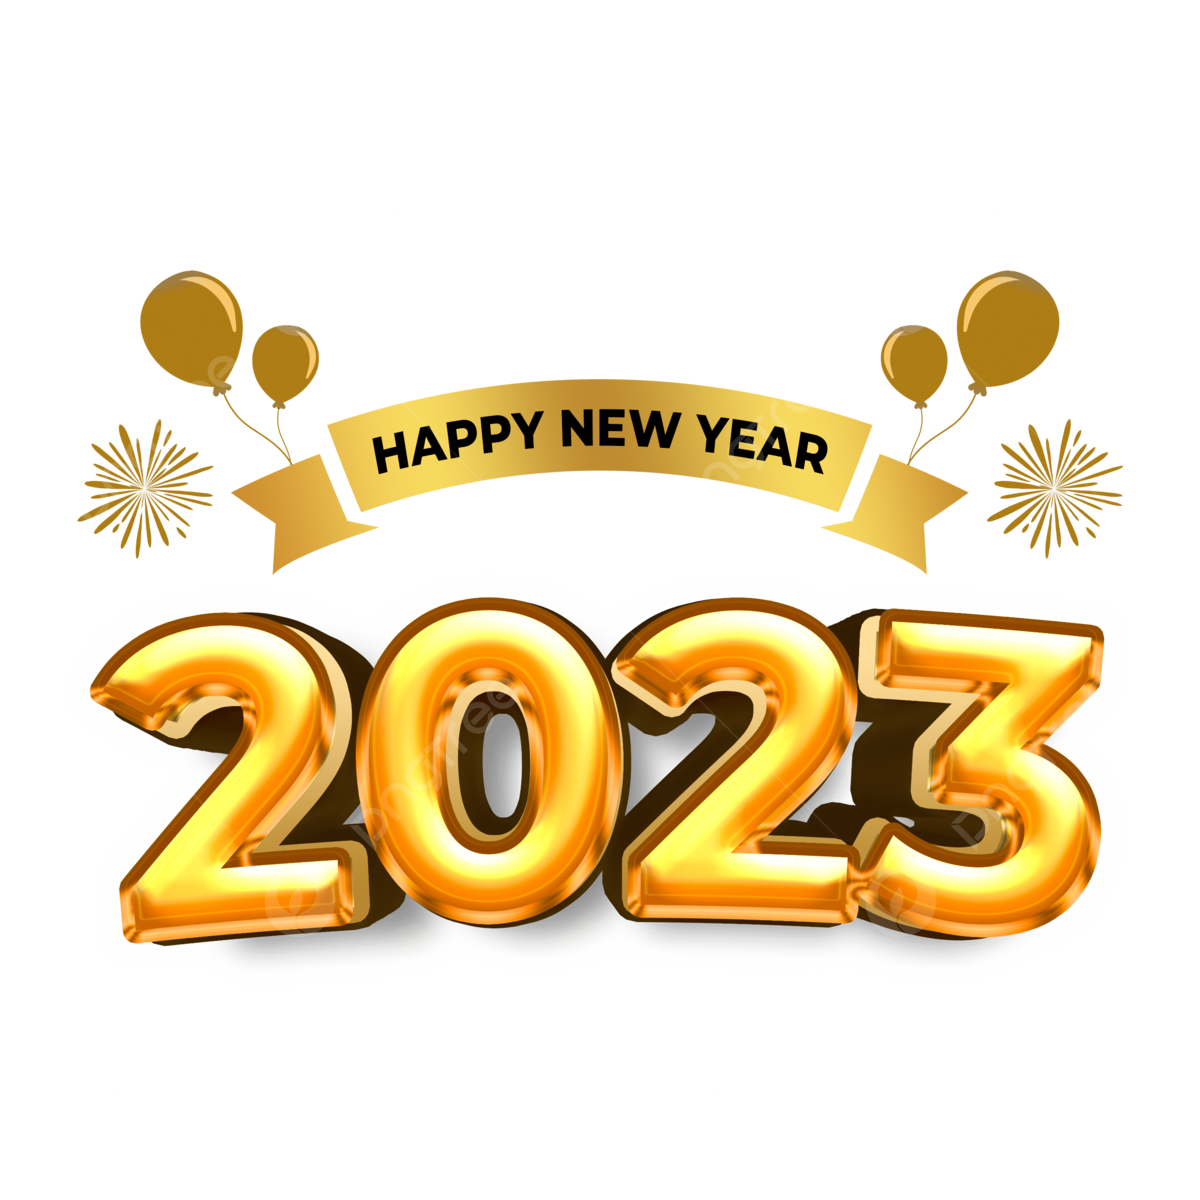 pngtree-happy-new-year-2023-png-image_8644784.png